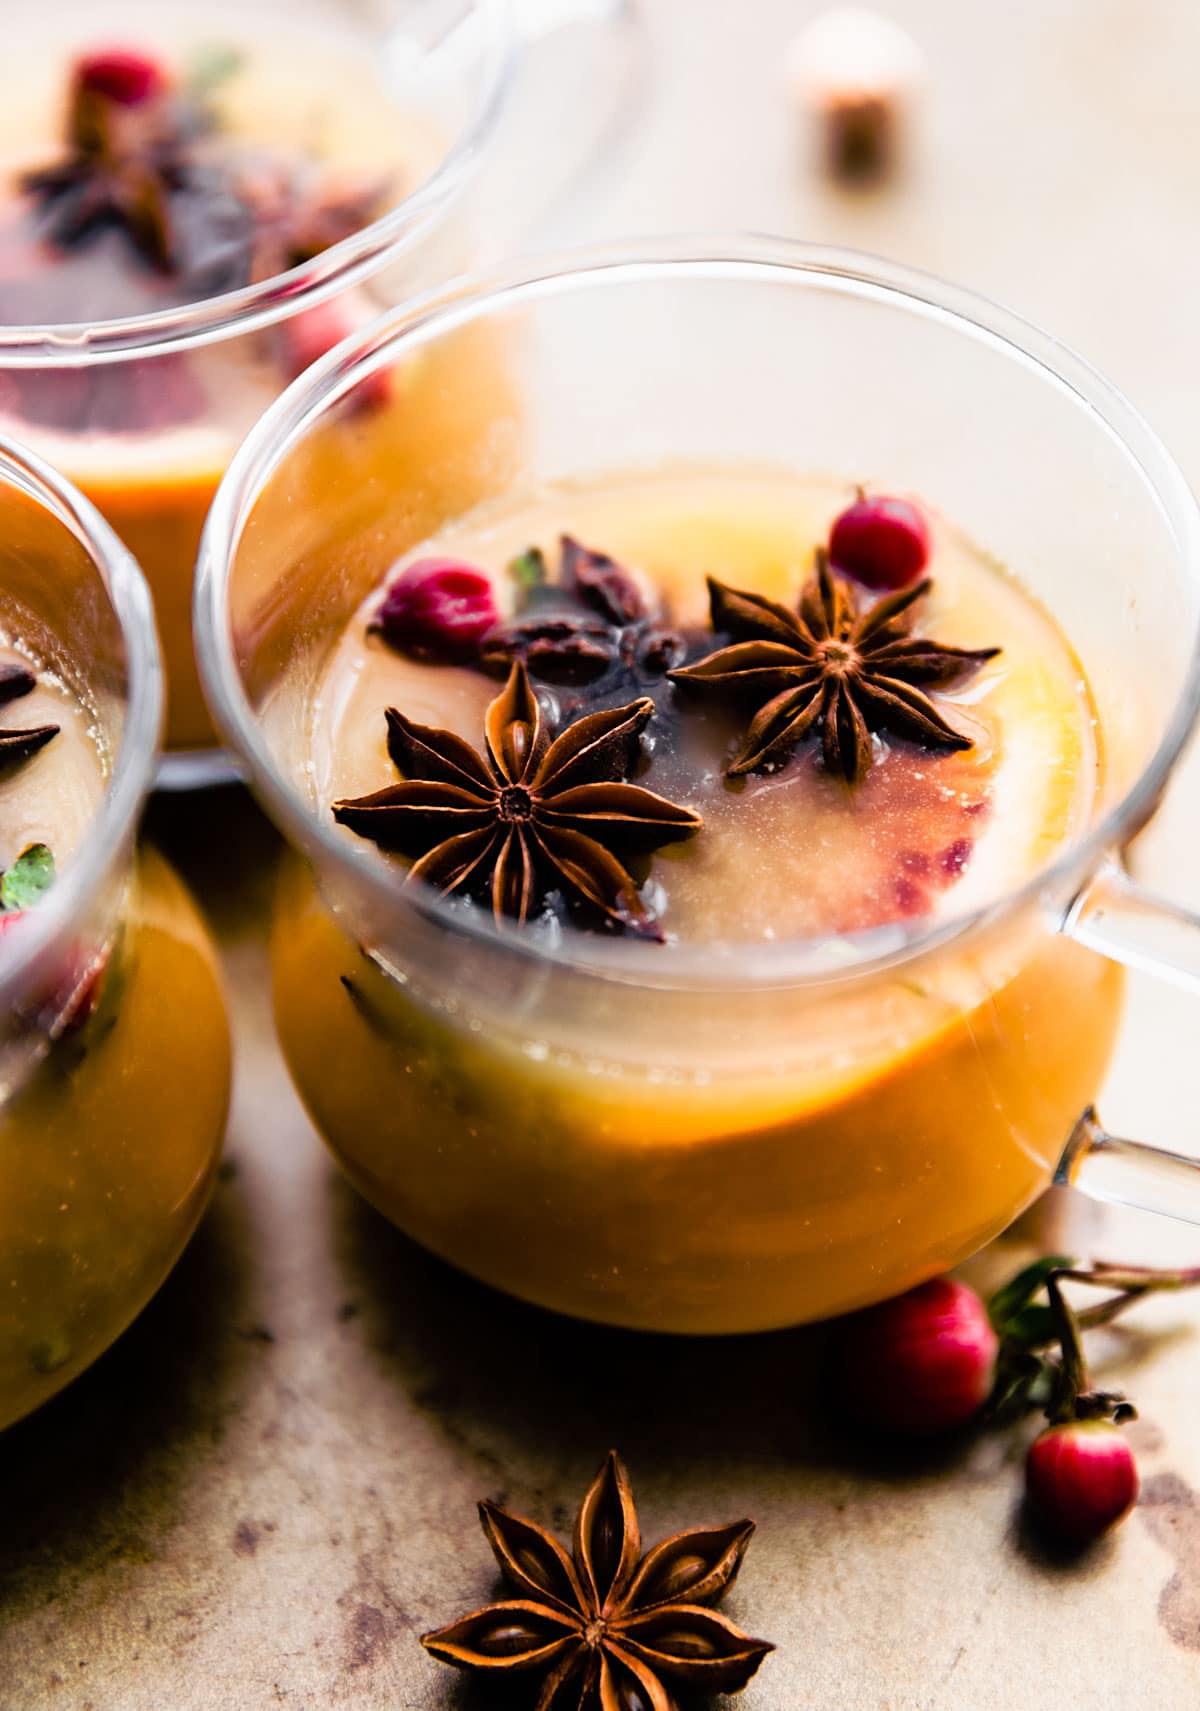 Close up view glass filled with spiced hot toddy with floating fresh cranberries, orange slices, and star anise.